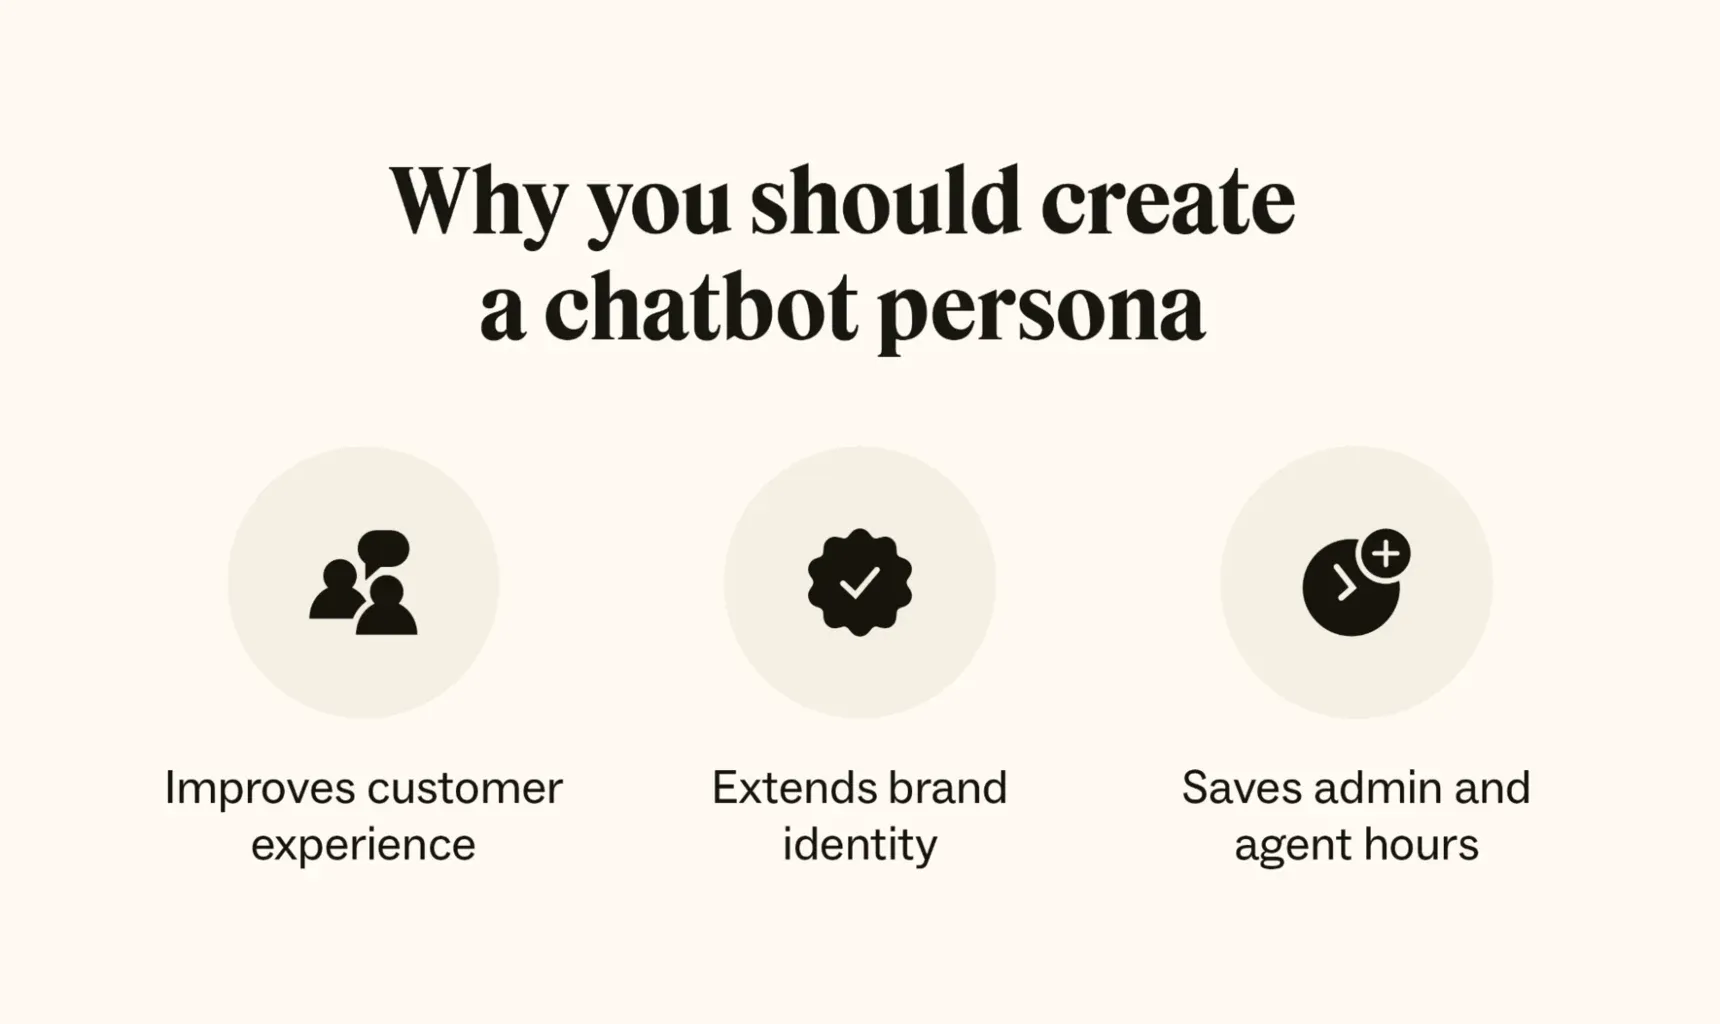 Why use a Chatbot Persona?